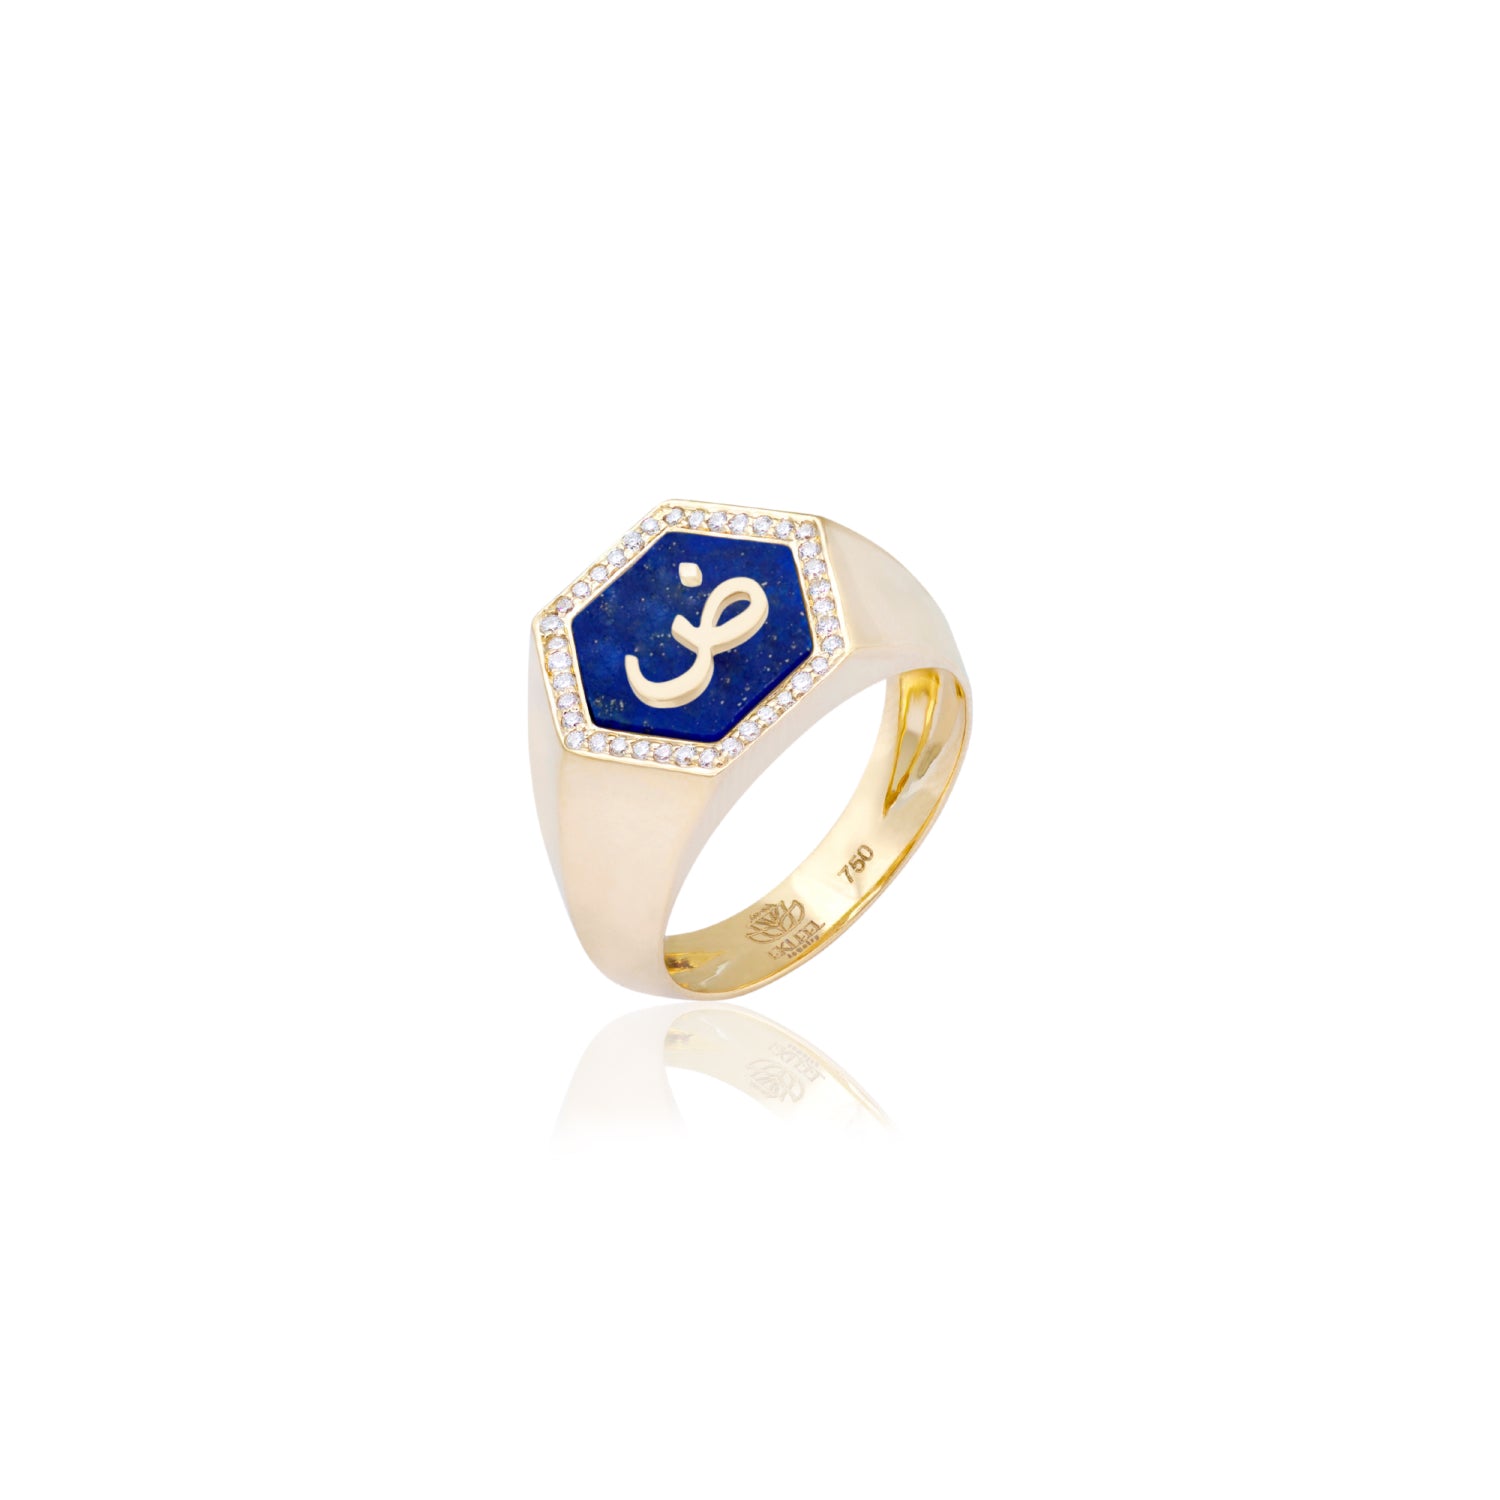   Qamoos 2.0 Letter ض Lapis Lazuli and Diamond Signet Ring in Yellow Gold